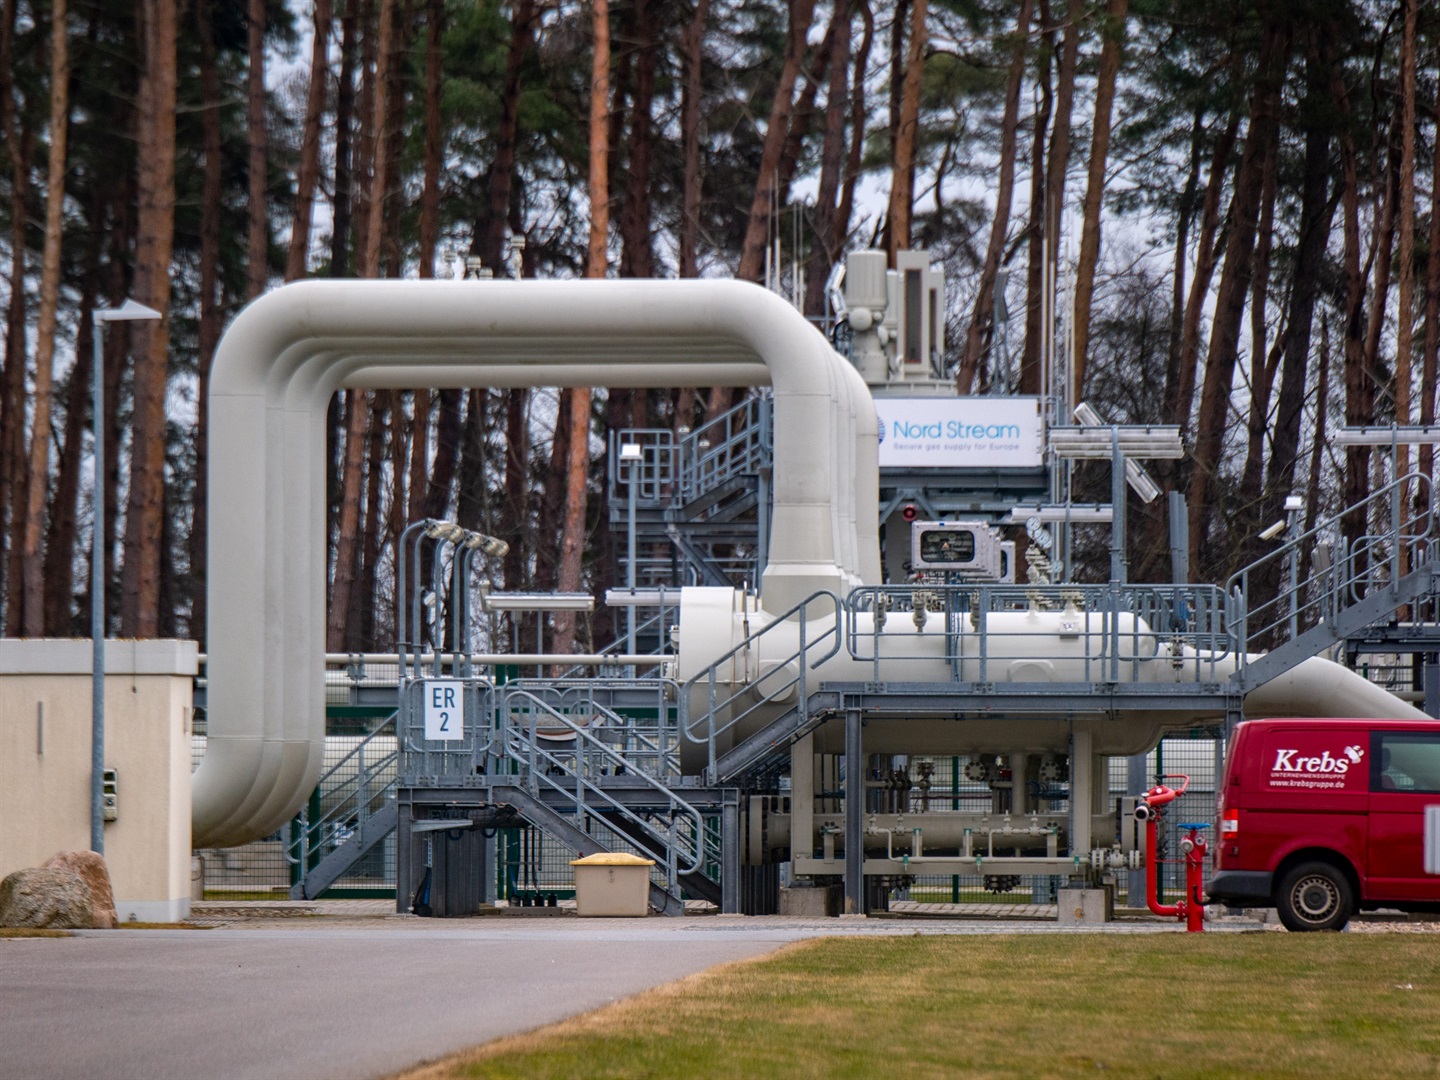 Germany can only last for about 2.5 months without Russian gas after Moscow throttled supplies, official warns